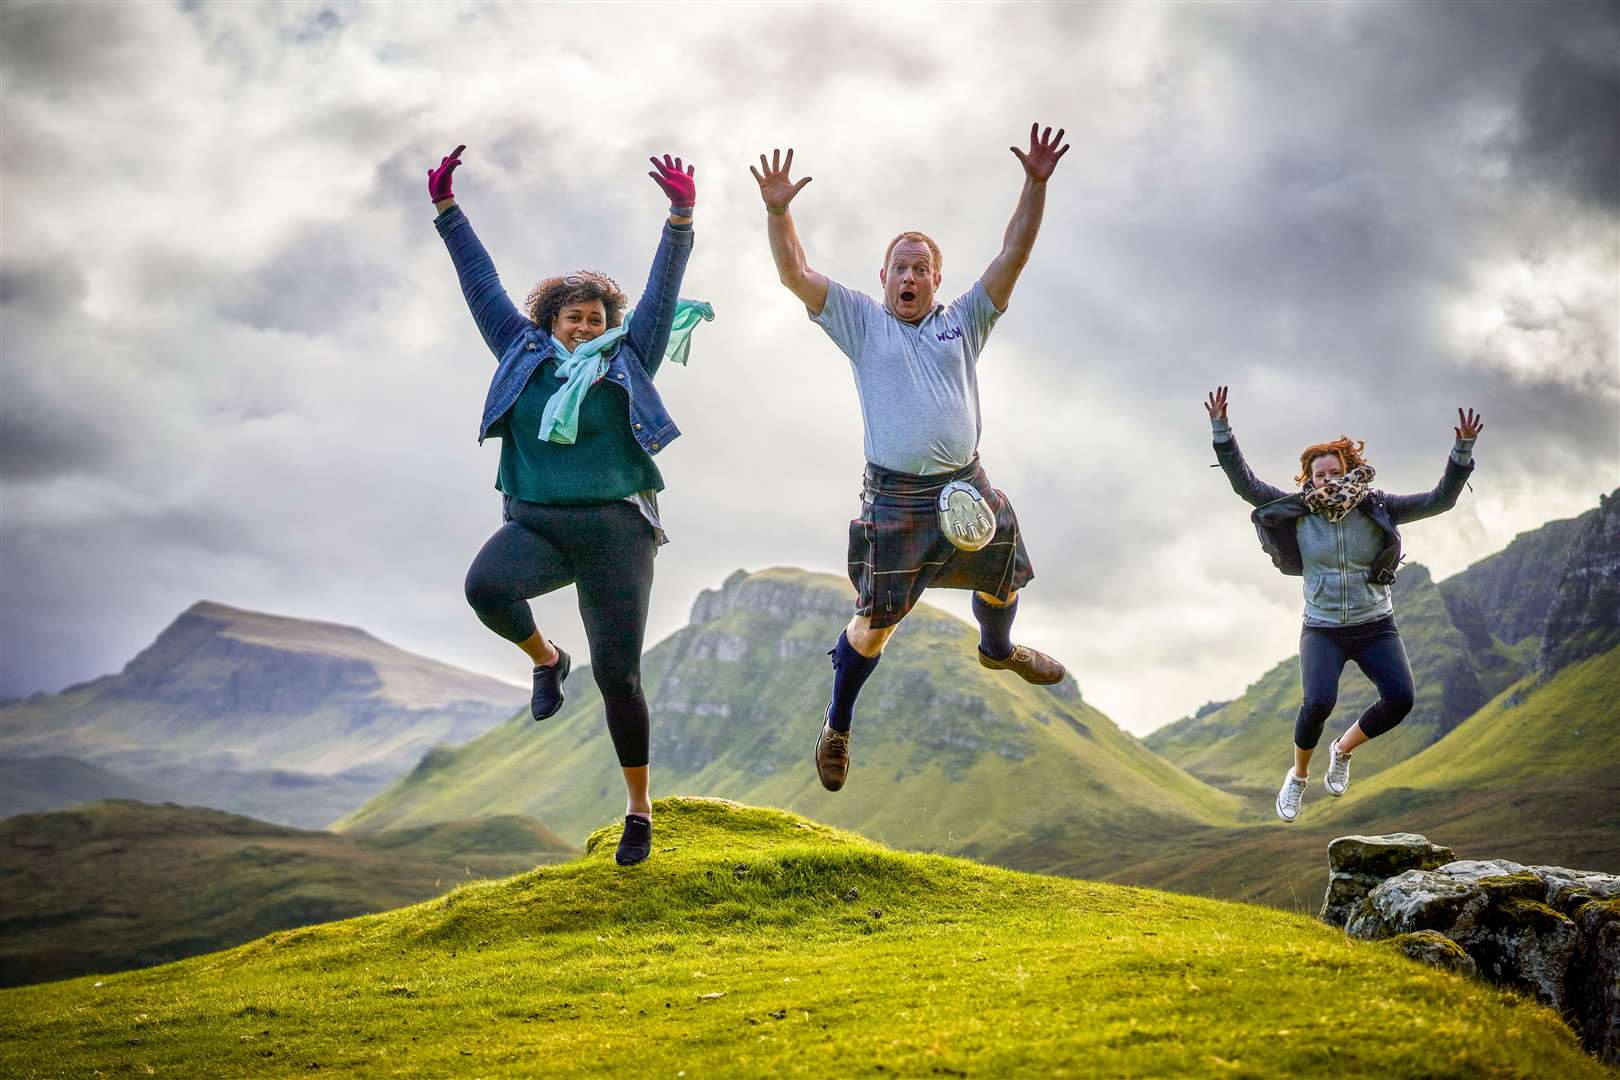 Gordon Pearson (centre), owner of WOW Scotland with two happy tour clients at the Quiraing on Skye. WOW Scotland won the Federation for Small Business' micro business of the year award 2020.